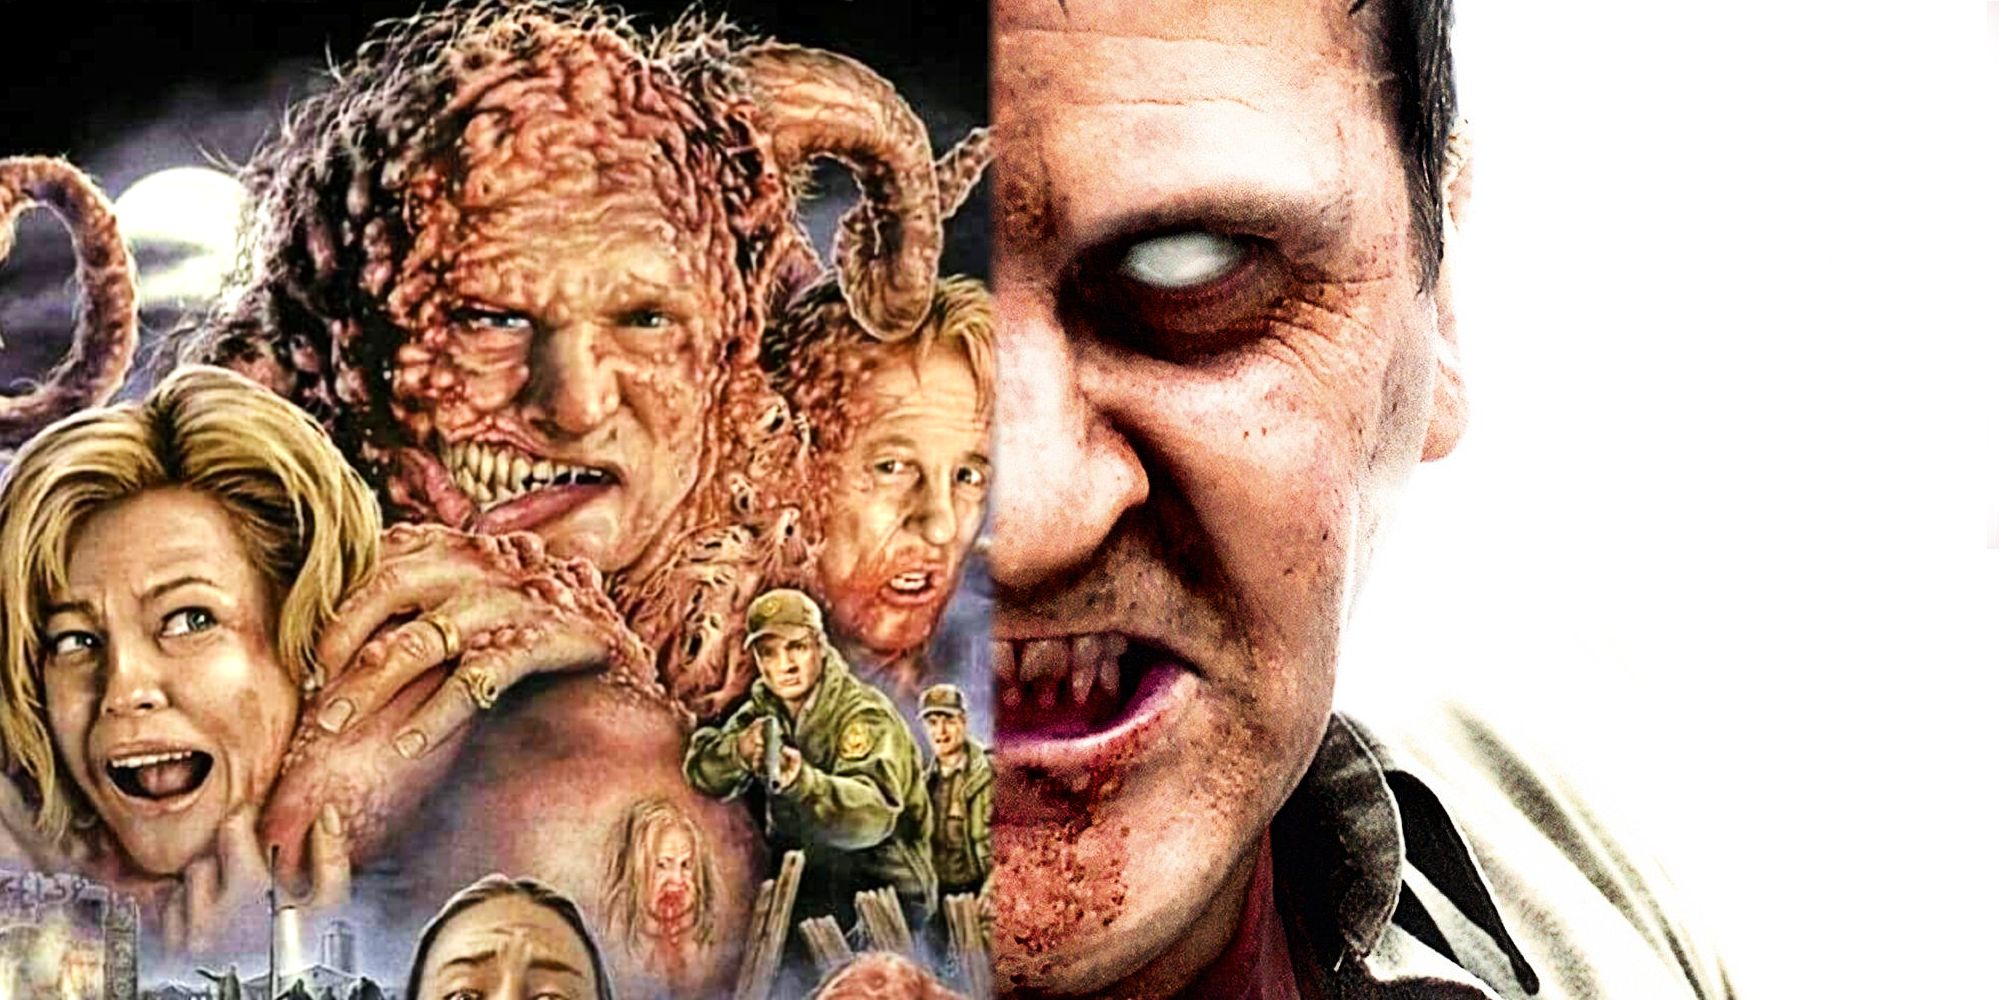 James Gunn's Slither and Dawn of the Dead